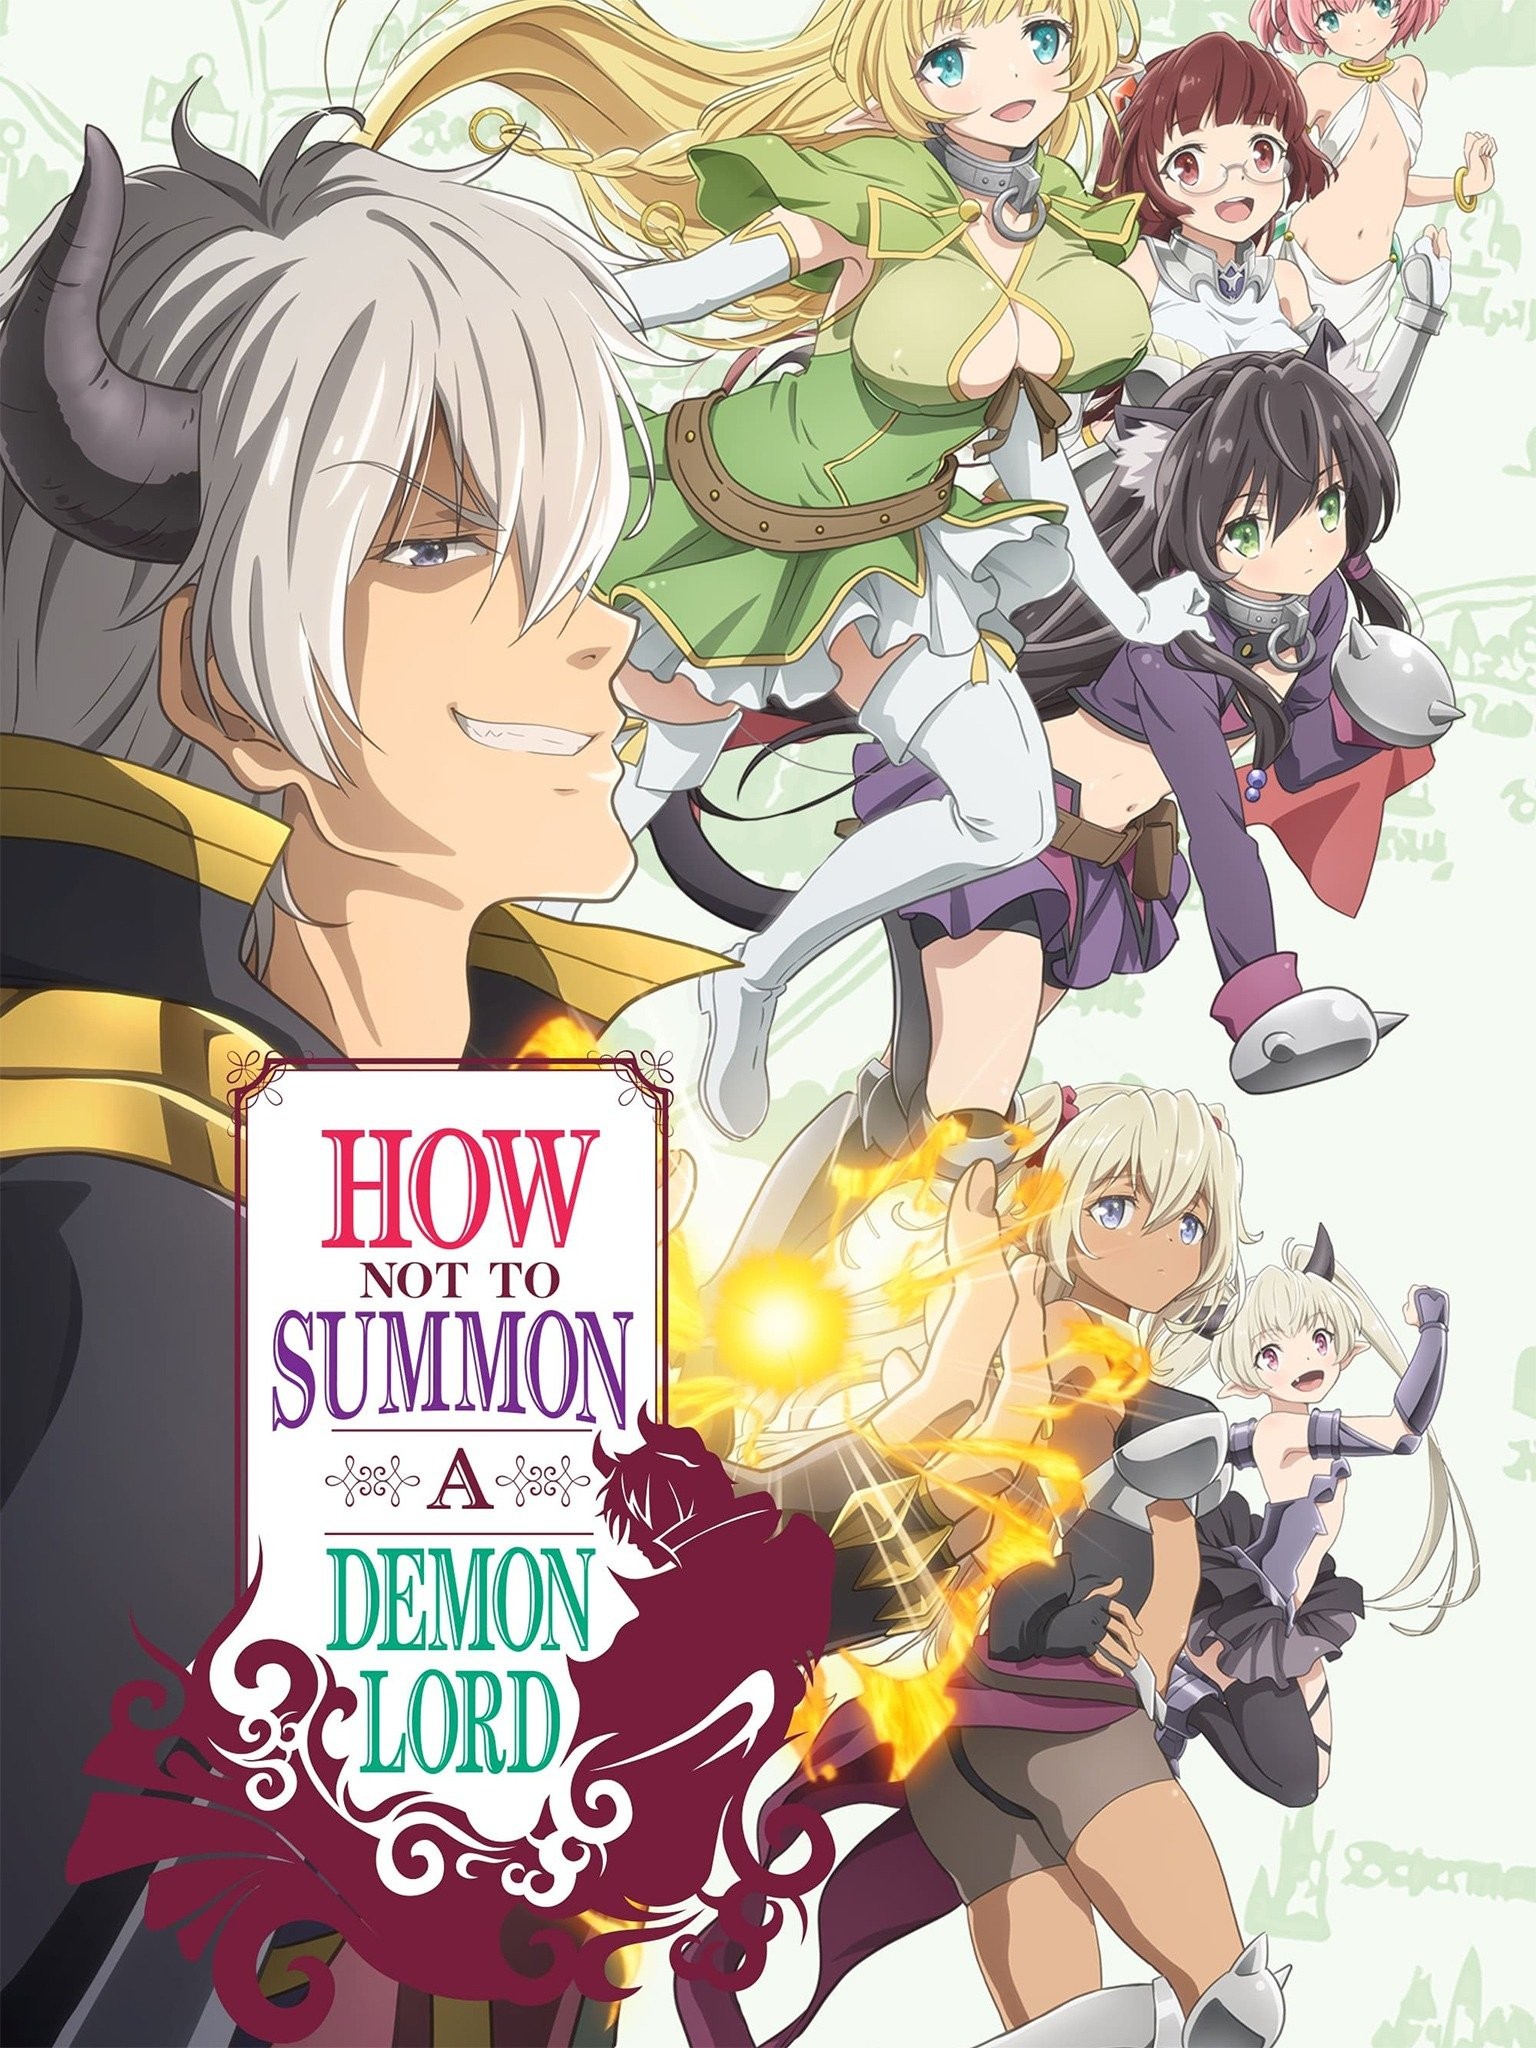 How Not to Summon a Demon Lord - Wikipedia